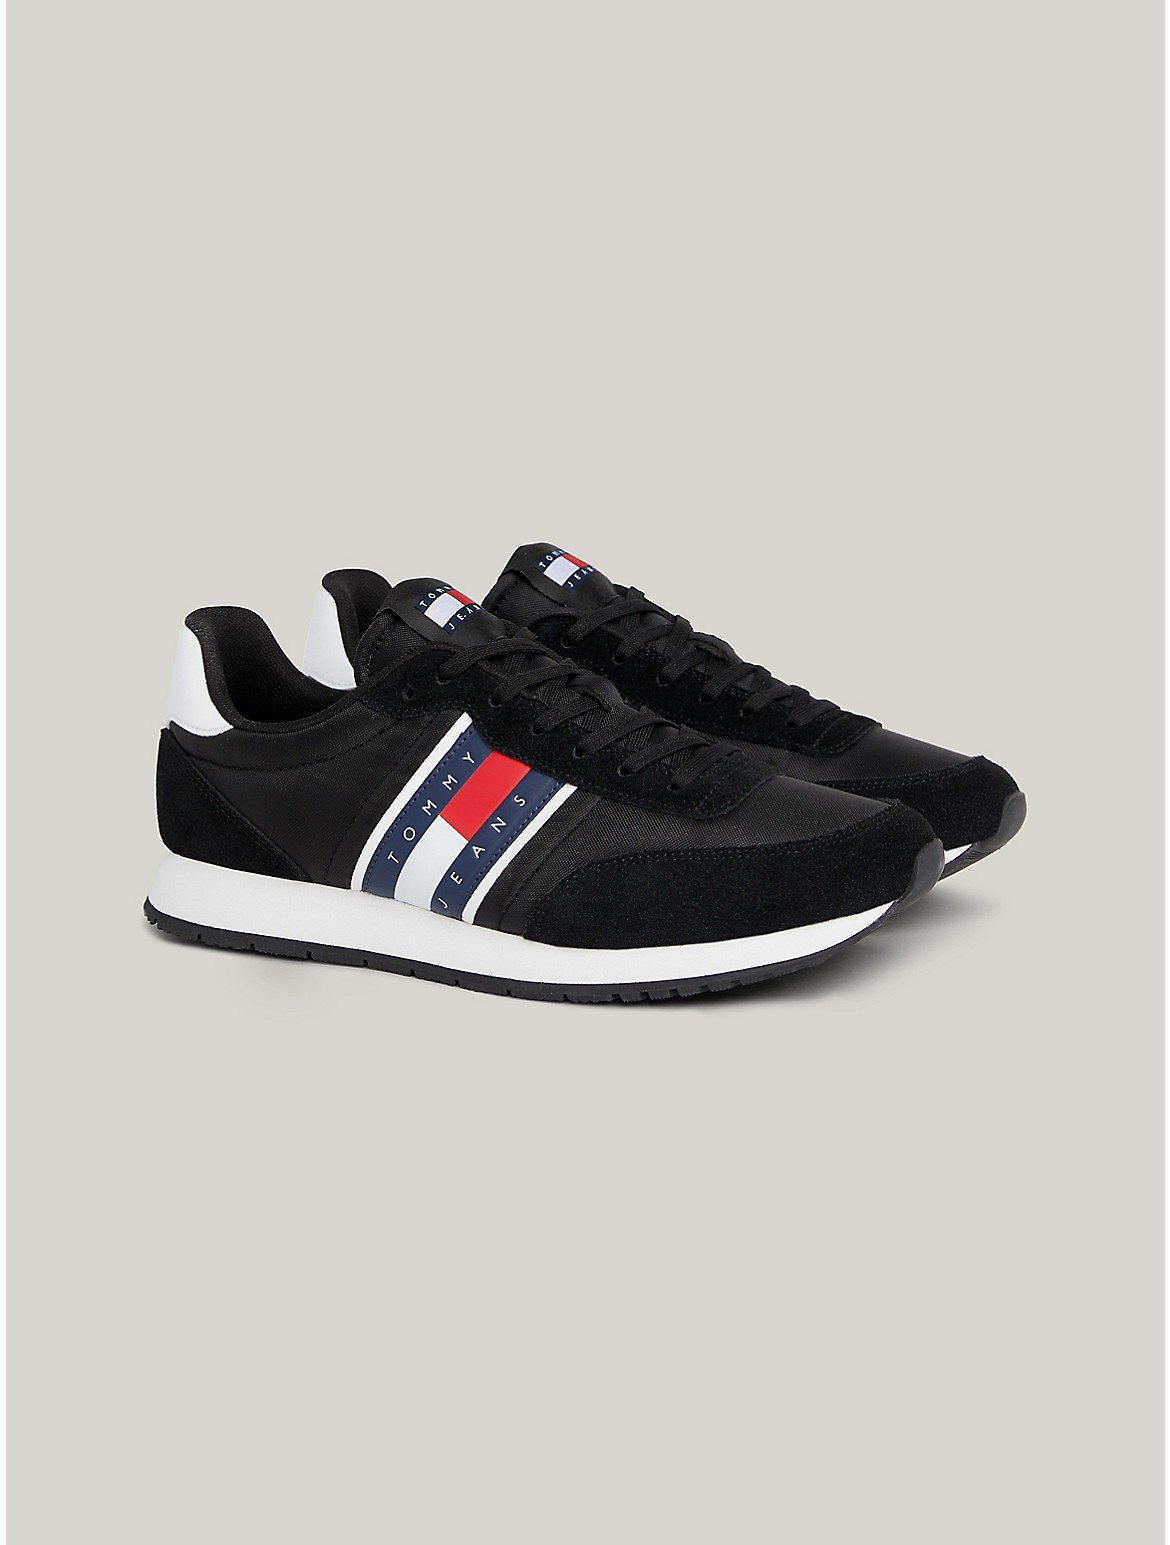 Tommy Hilfiger Men's TJ Mixed Panel Cleated Sneaker